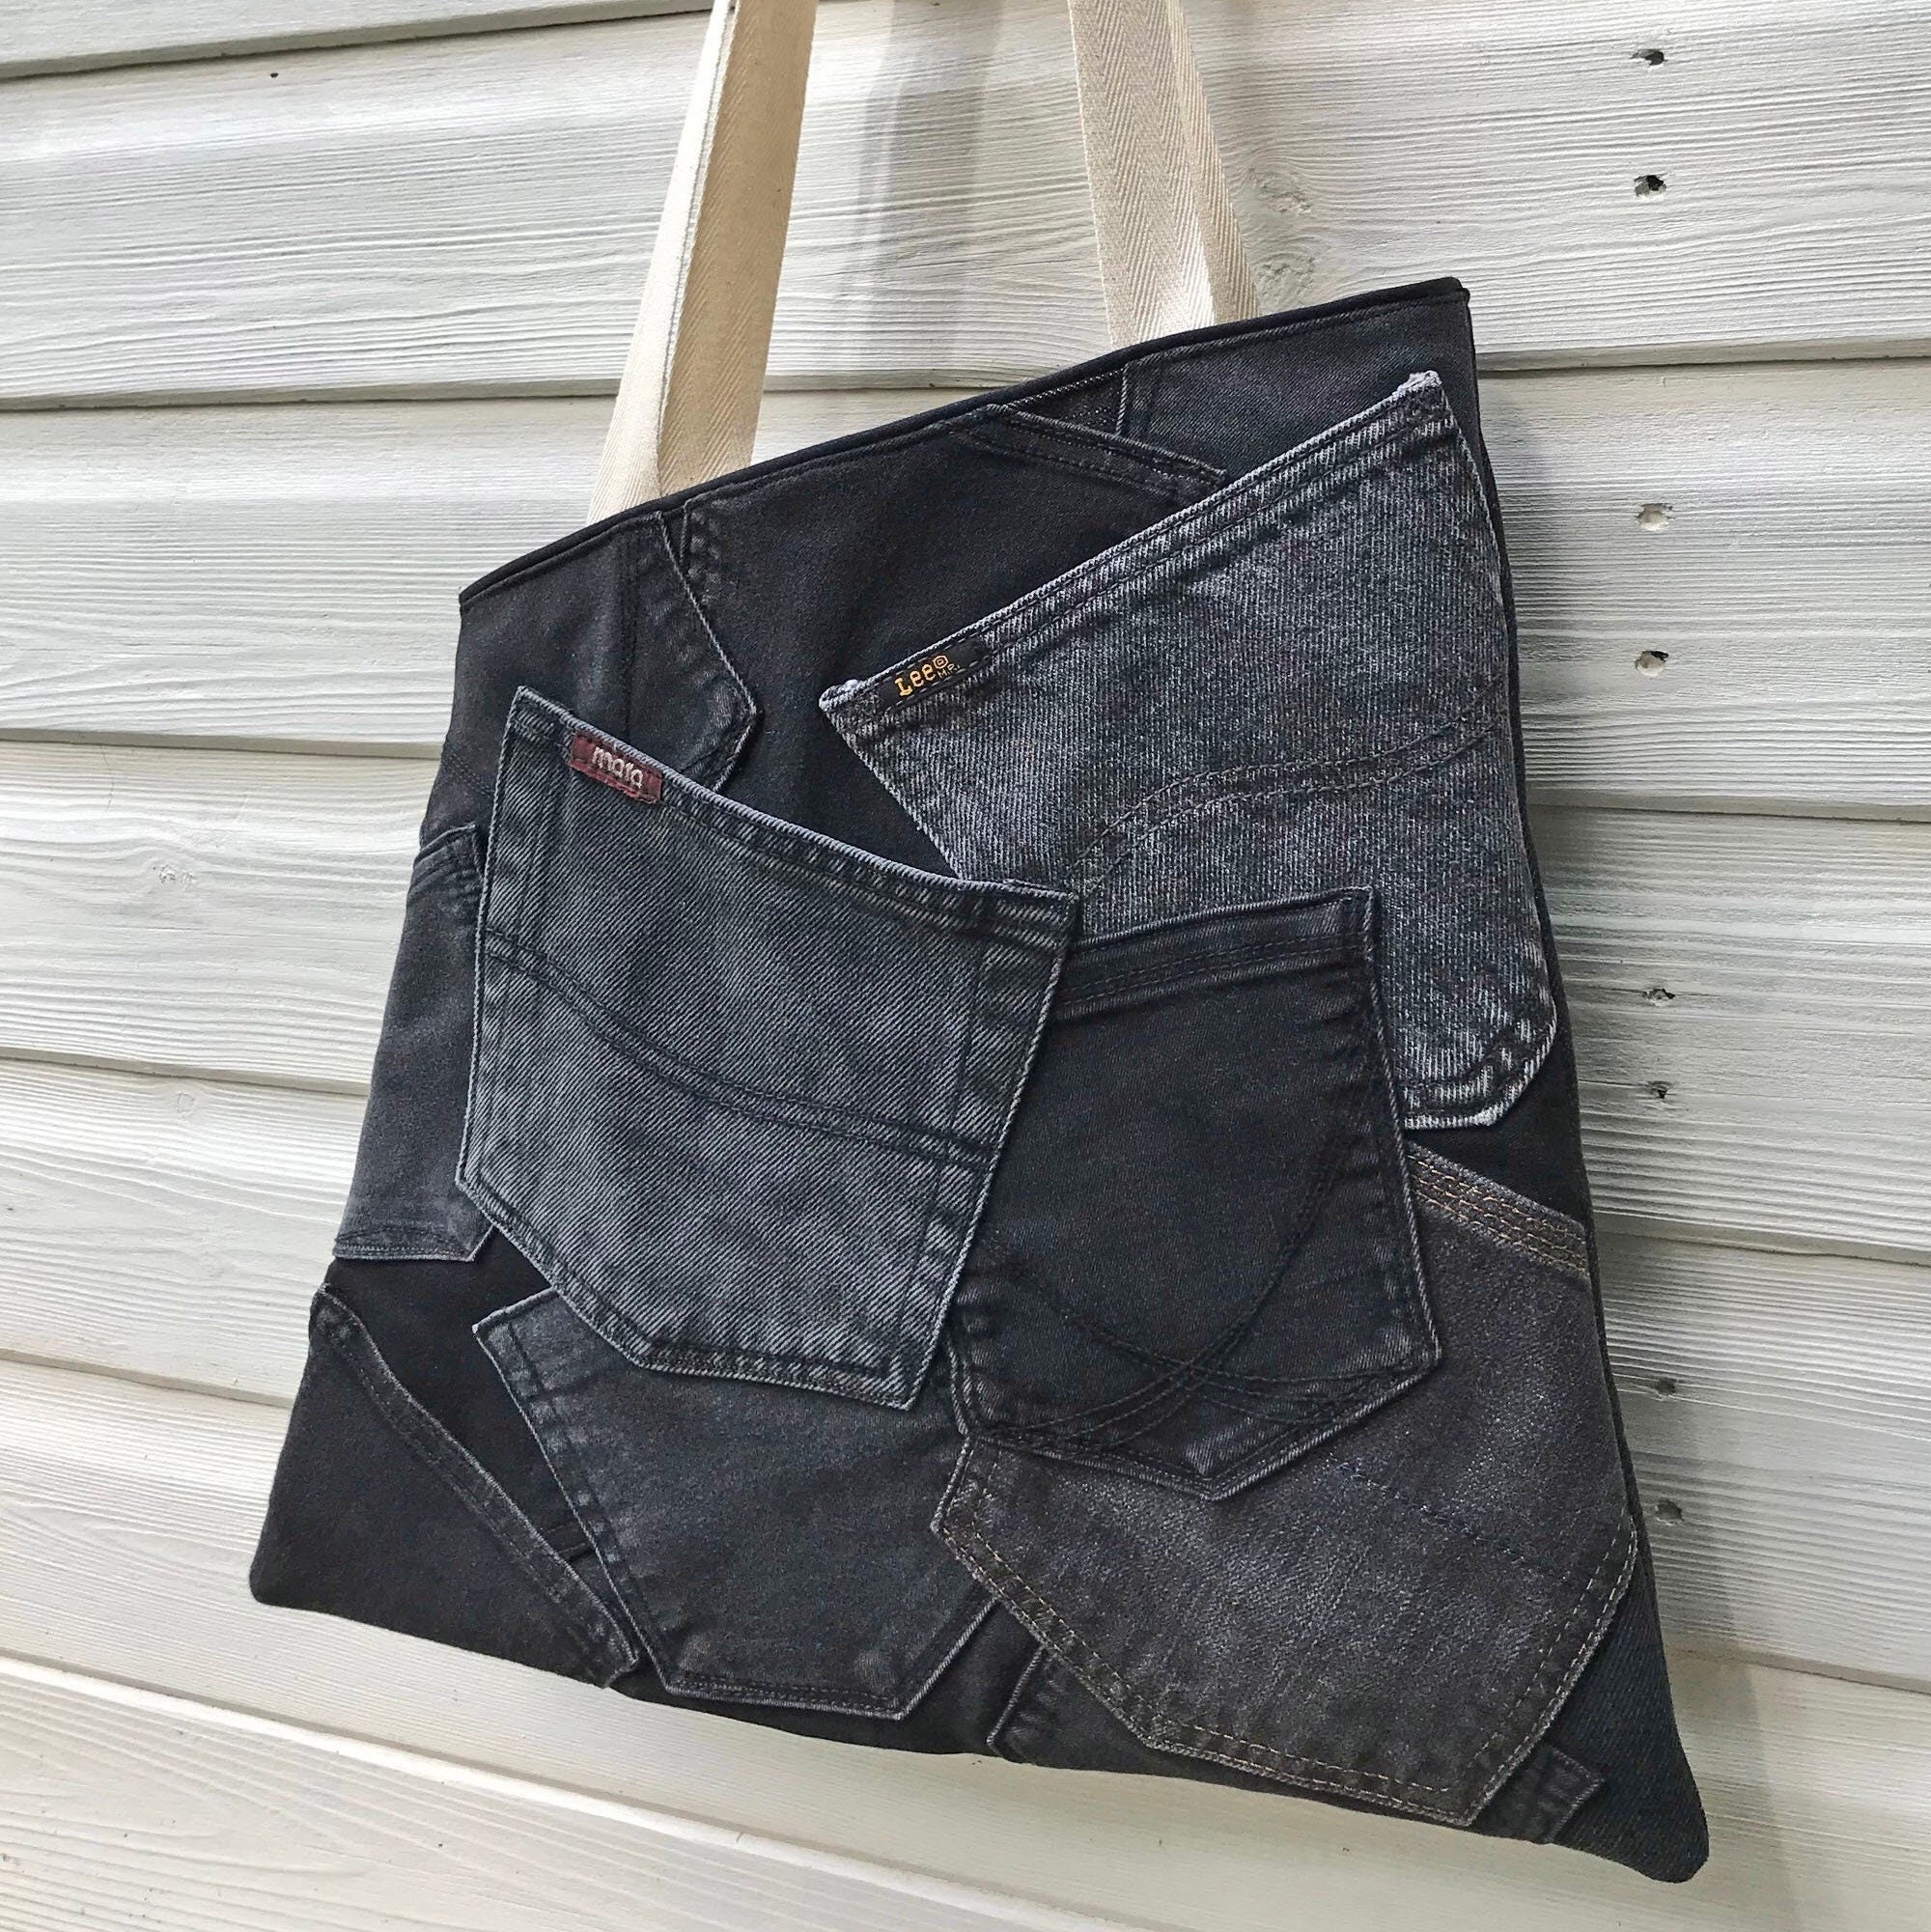 Weston Recycled Patchwork Denim and Leather Tote Bag